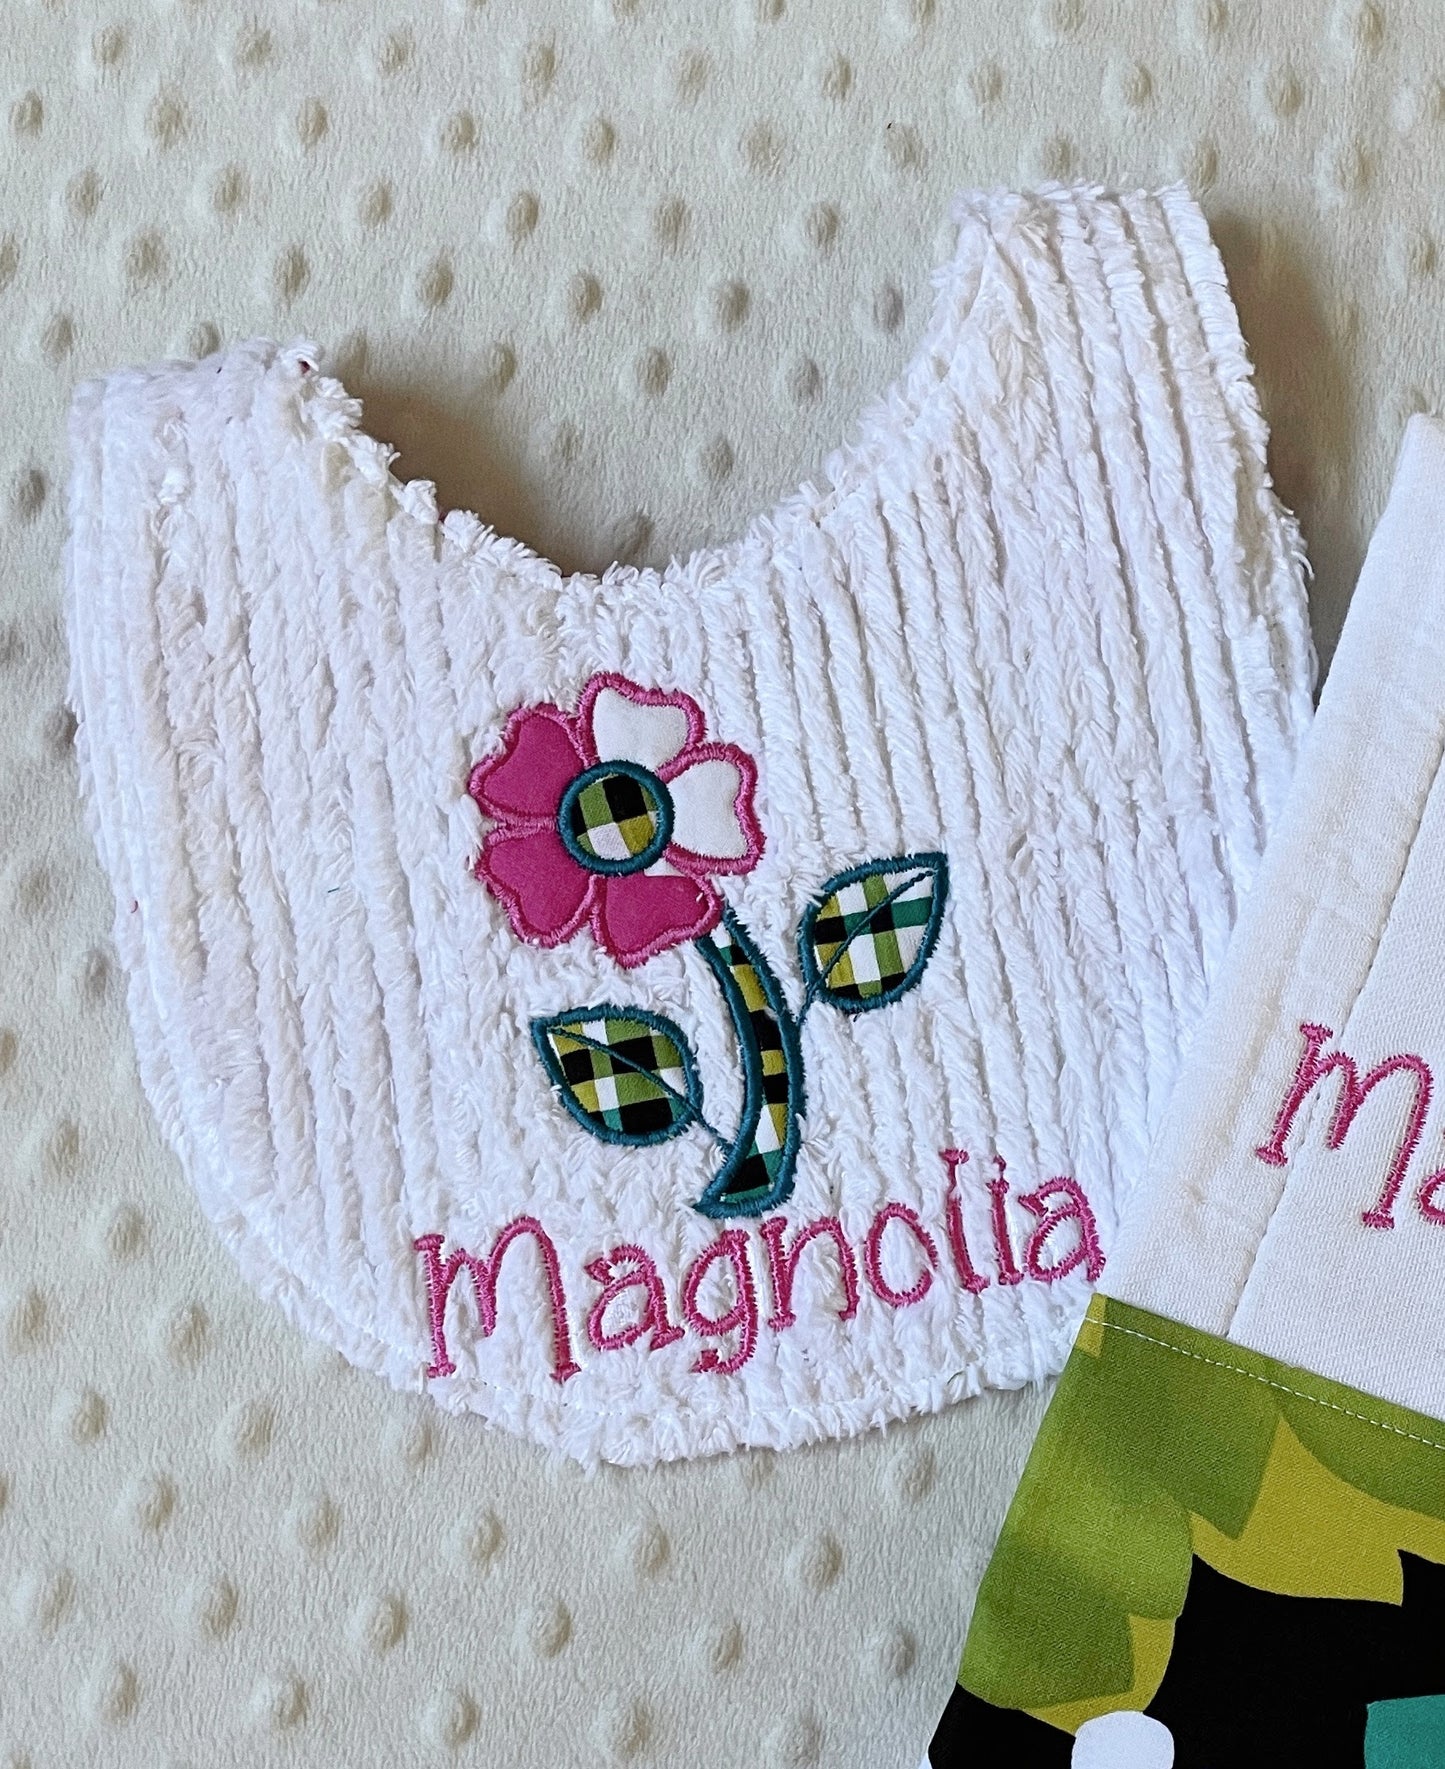 Handmade Baby Girl Gift - Personalized Bib and Burp Cloth in Stylish Florals